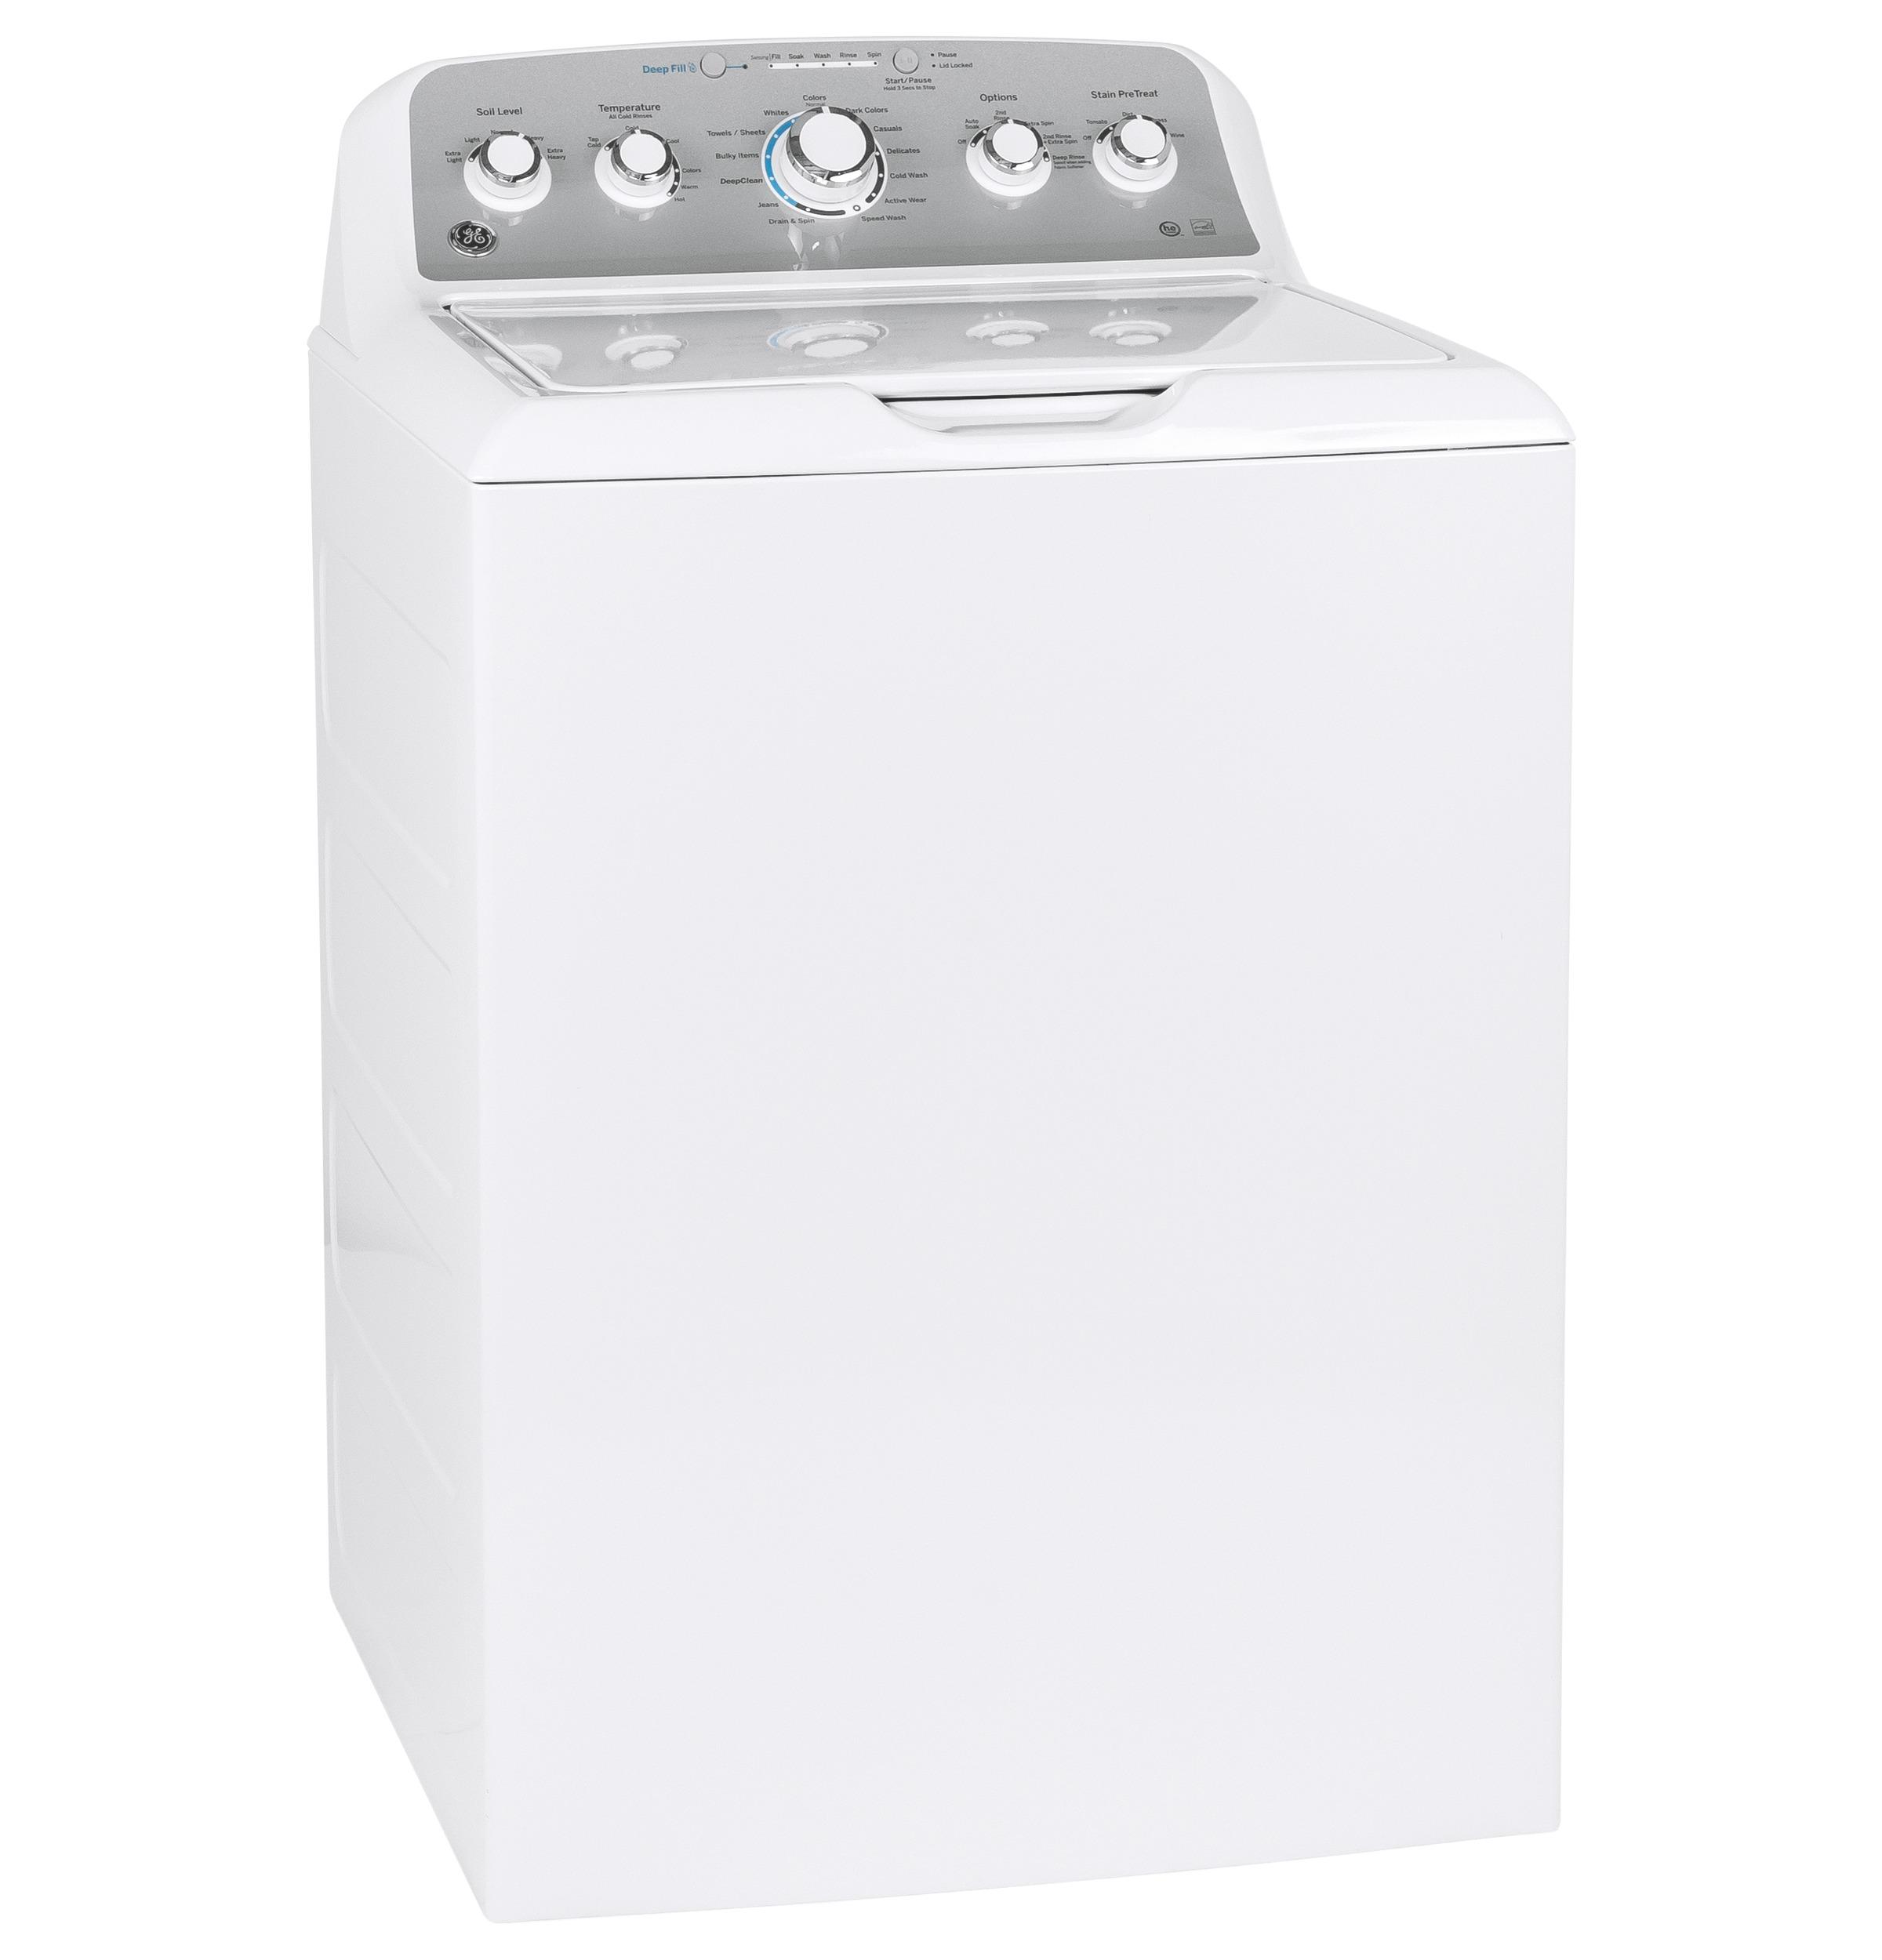 Ge Gtw500a 27" Wide 4.6 Cu Ft. Top Loading Washing Machine - White - image 5 of 5